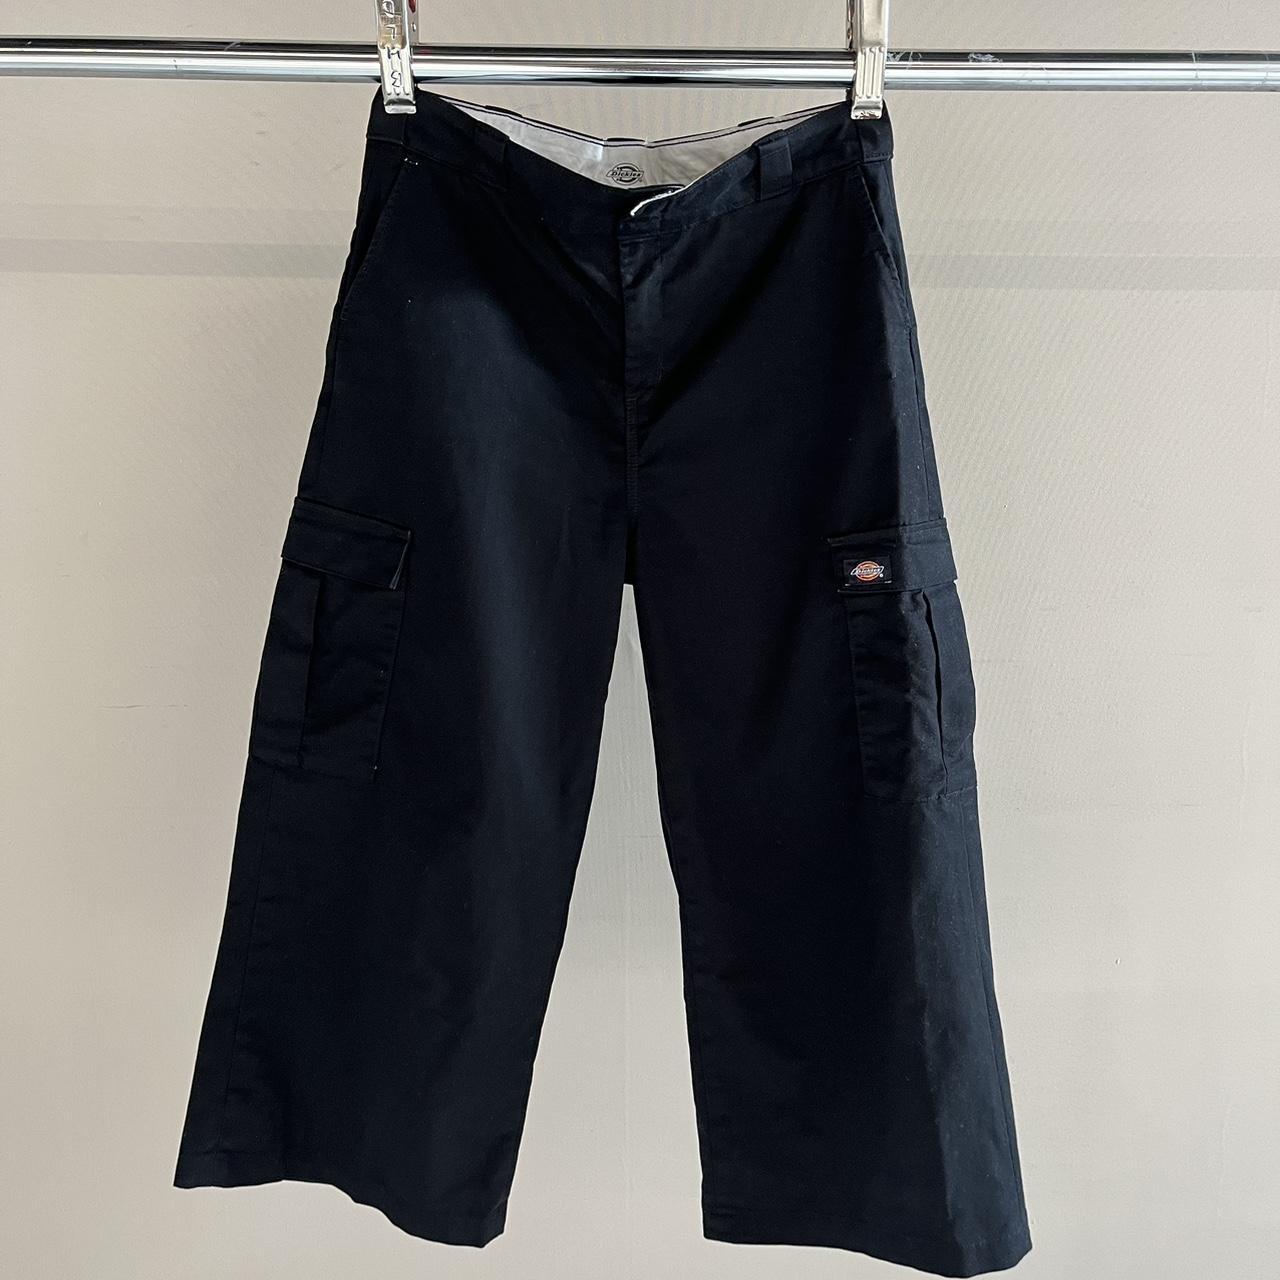 Dickies Twill Cropped Cargo Pant in black., measured